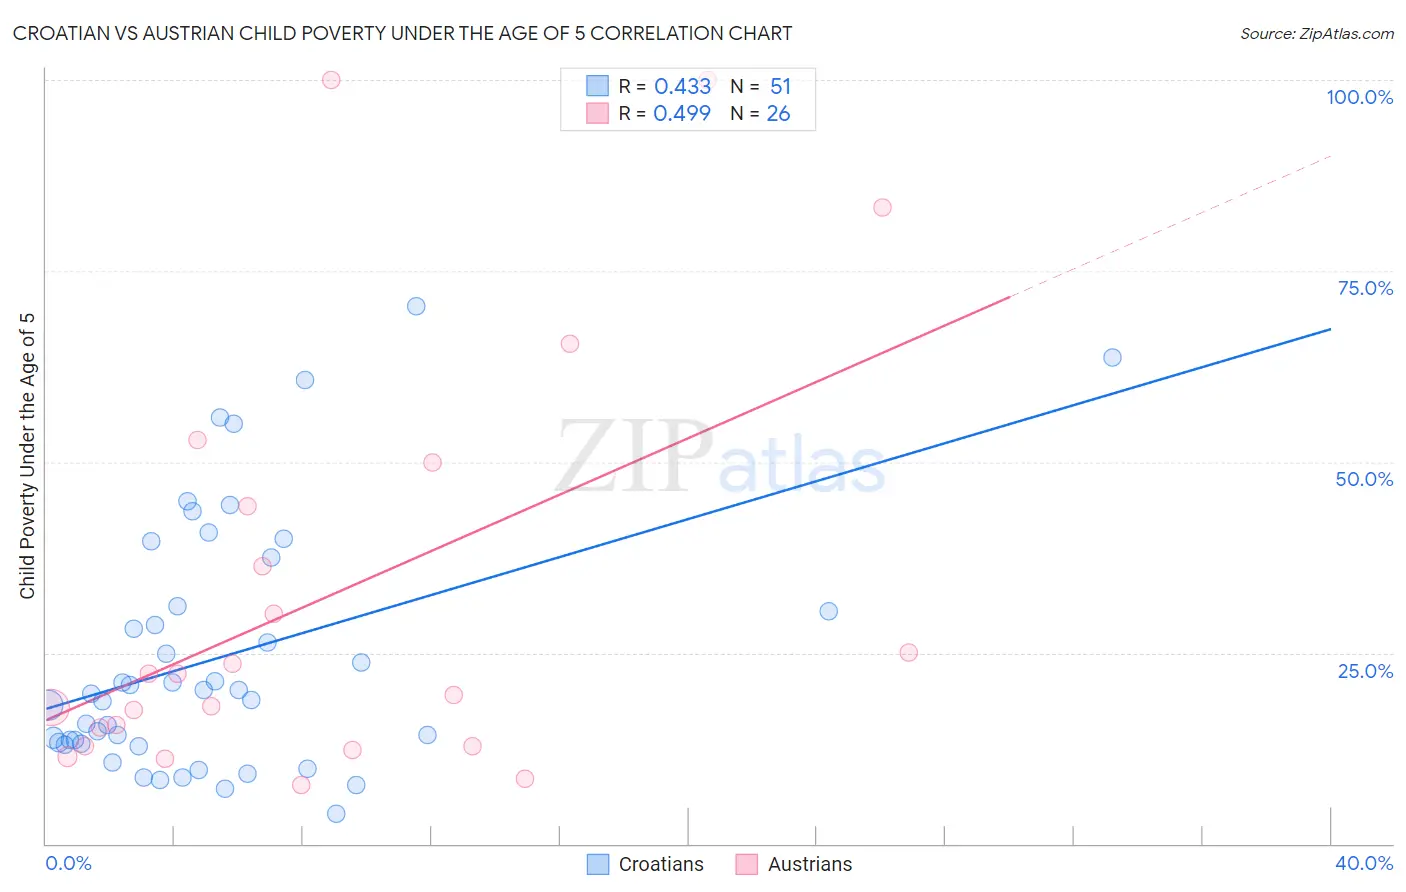 Croatian vs Austrian Child Poverty Under the Age of 5